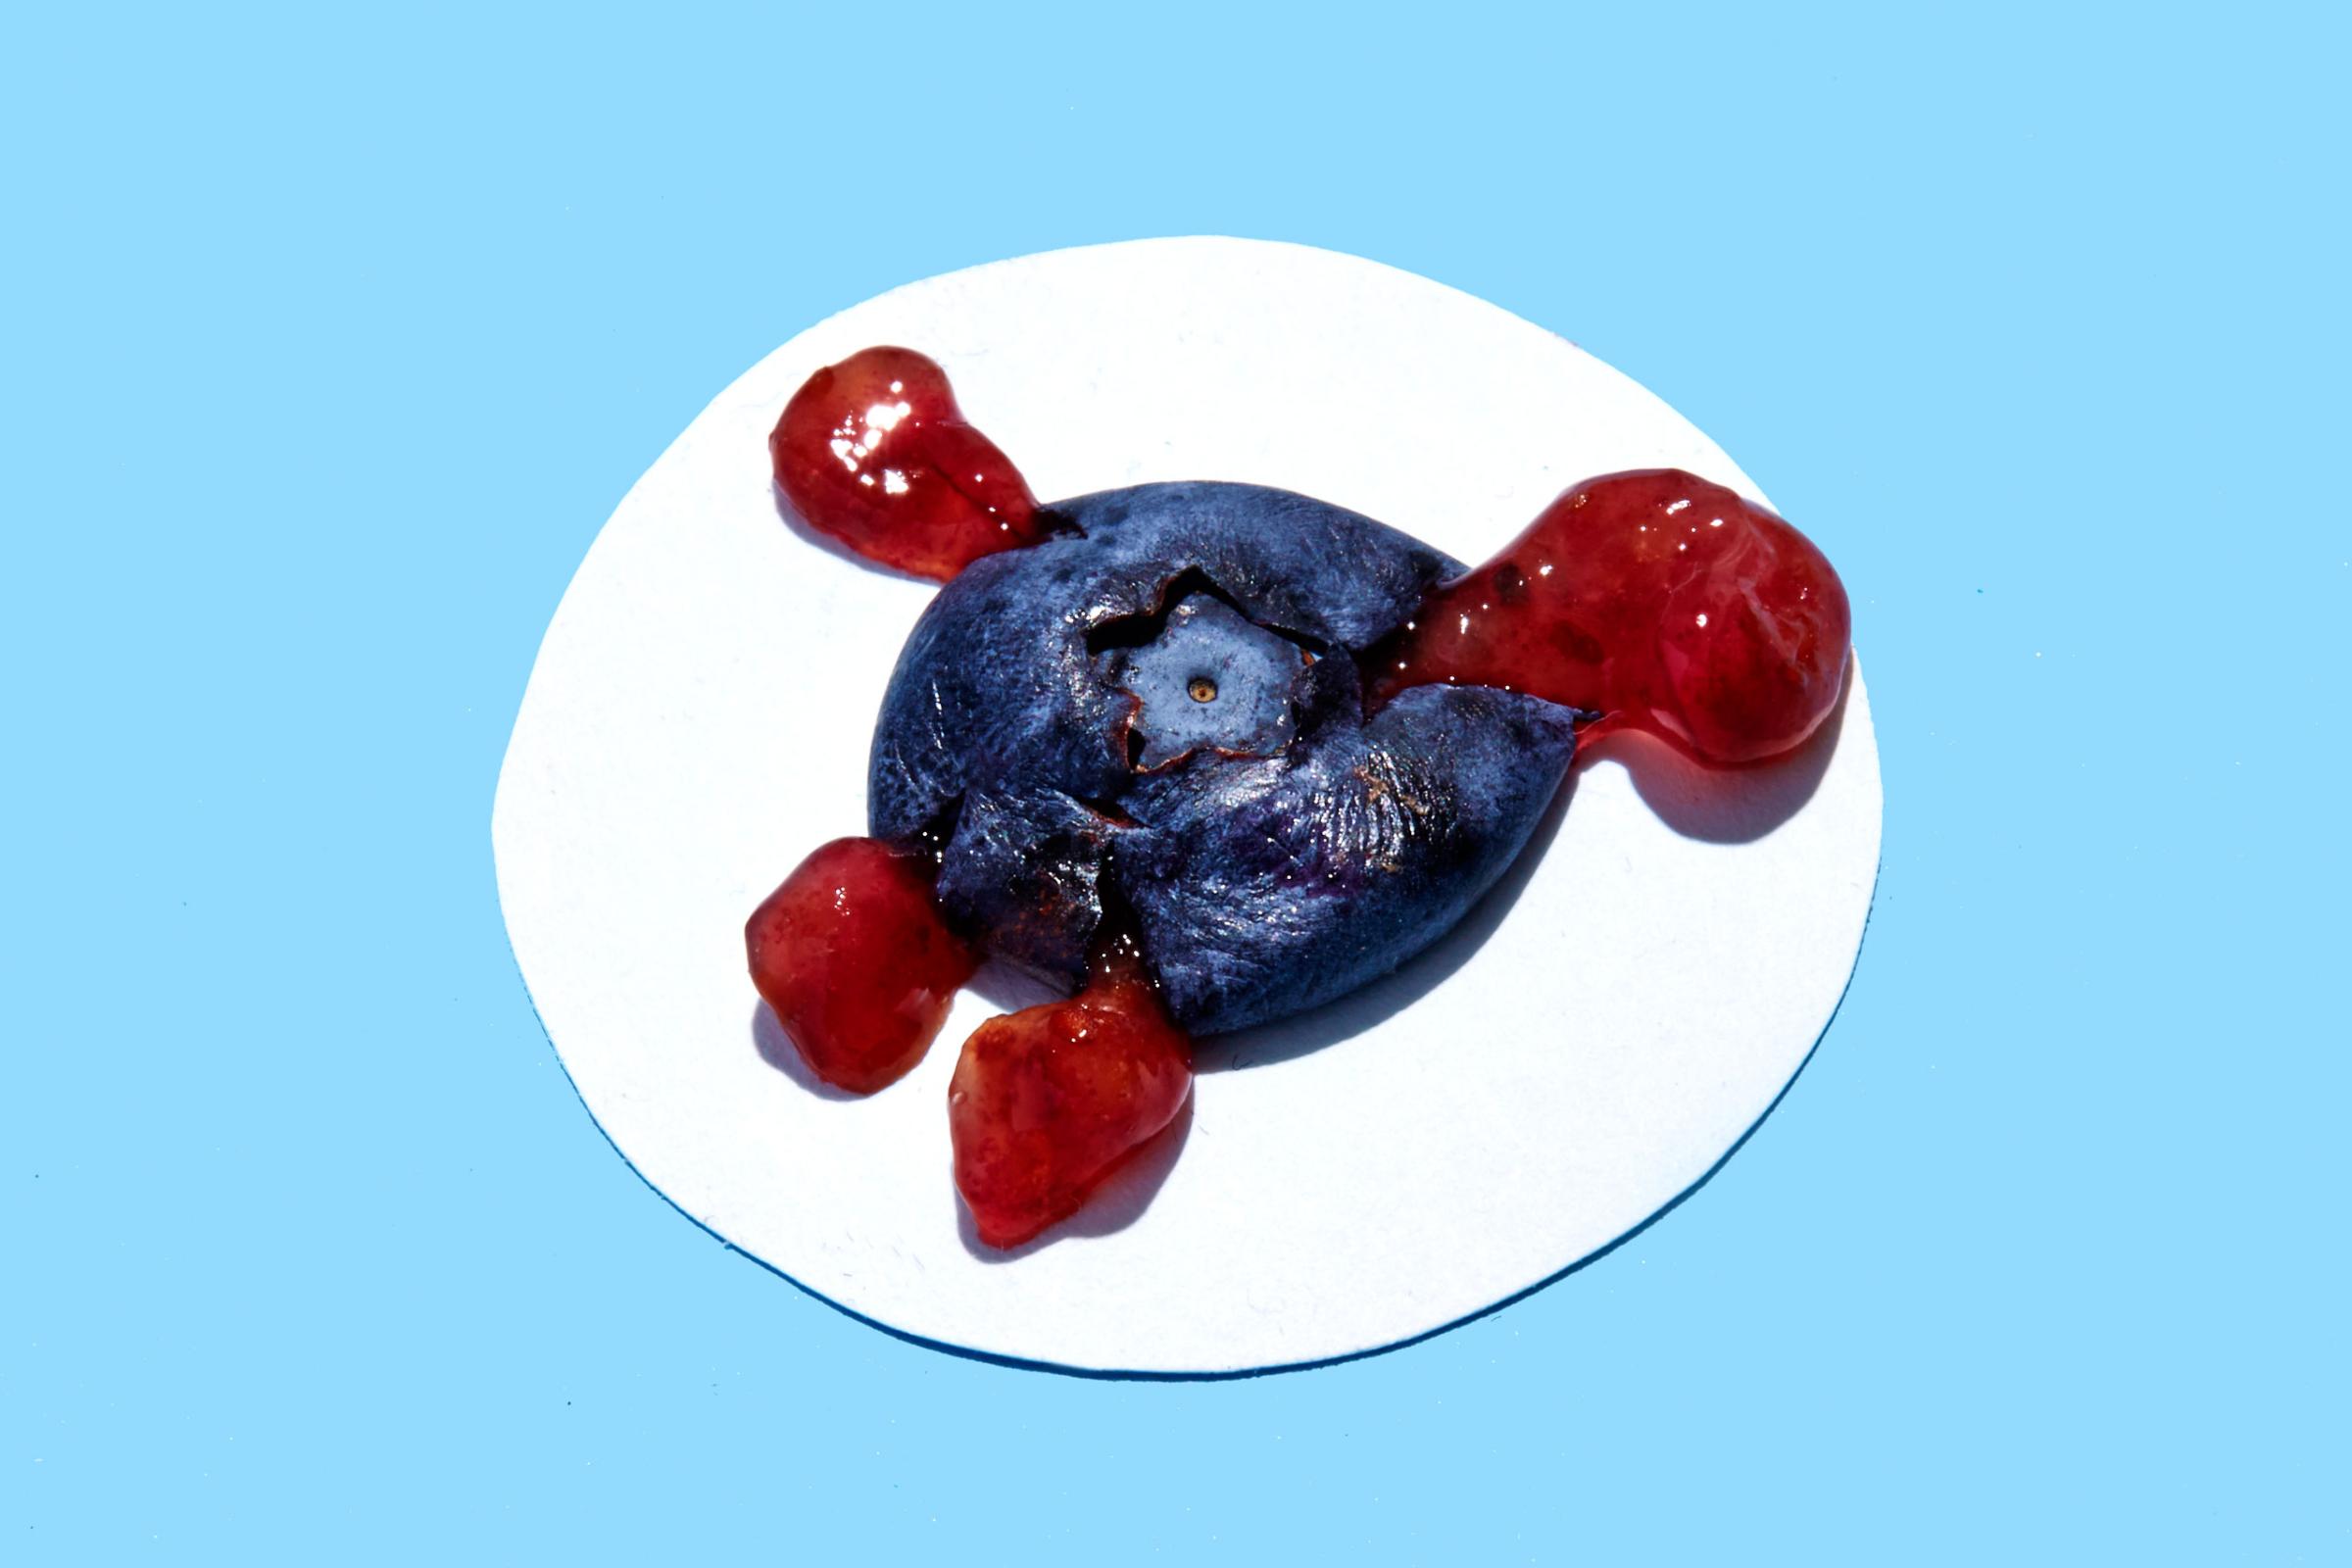 healthiest foods, health food, diet, nutrition, time.com stock, blueberries, blueberry, fruit